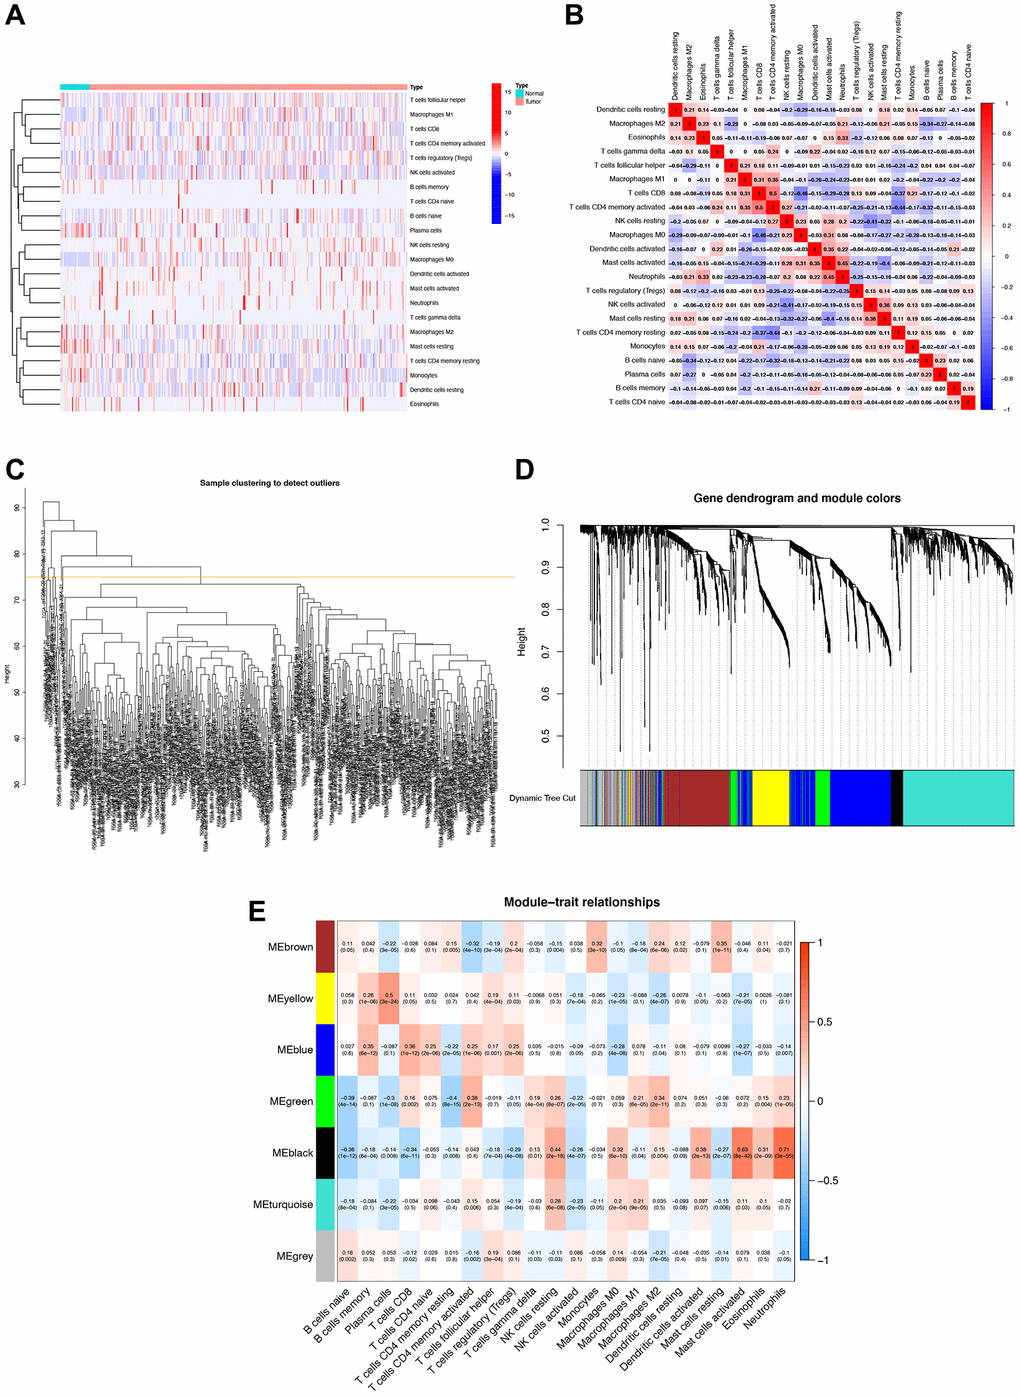 Immune cell correlation analysis and weighted gene co-expression network analysis (WGCNA). (A) Correlation analysis of immune cell populations in normal and tumor samples, with negative correlations in blue and positive correlations in red. (B) Detailed immune cell correlation analysis. (C) Sample clustering to detect groups with more than 75 samples. (D) WGCNA co-expression analysis showing which module each gene belongs to. (E) Clinical correlation analysis of each module to observe the correlation between modules and immune cells, with blue representing negative correlation and red representing positive correlation.